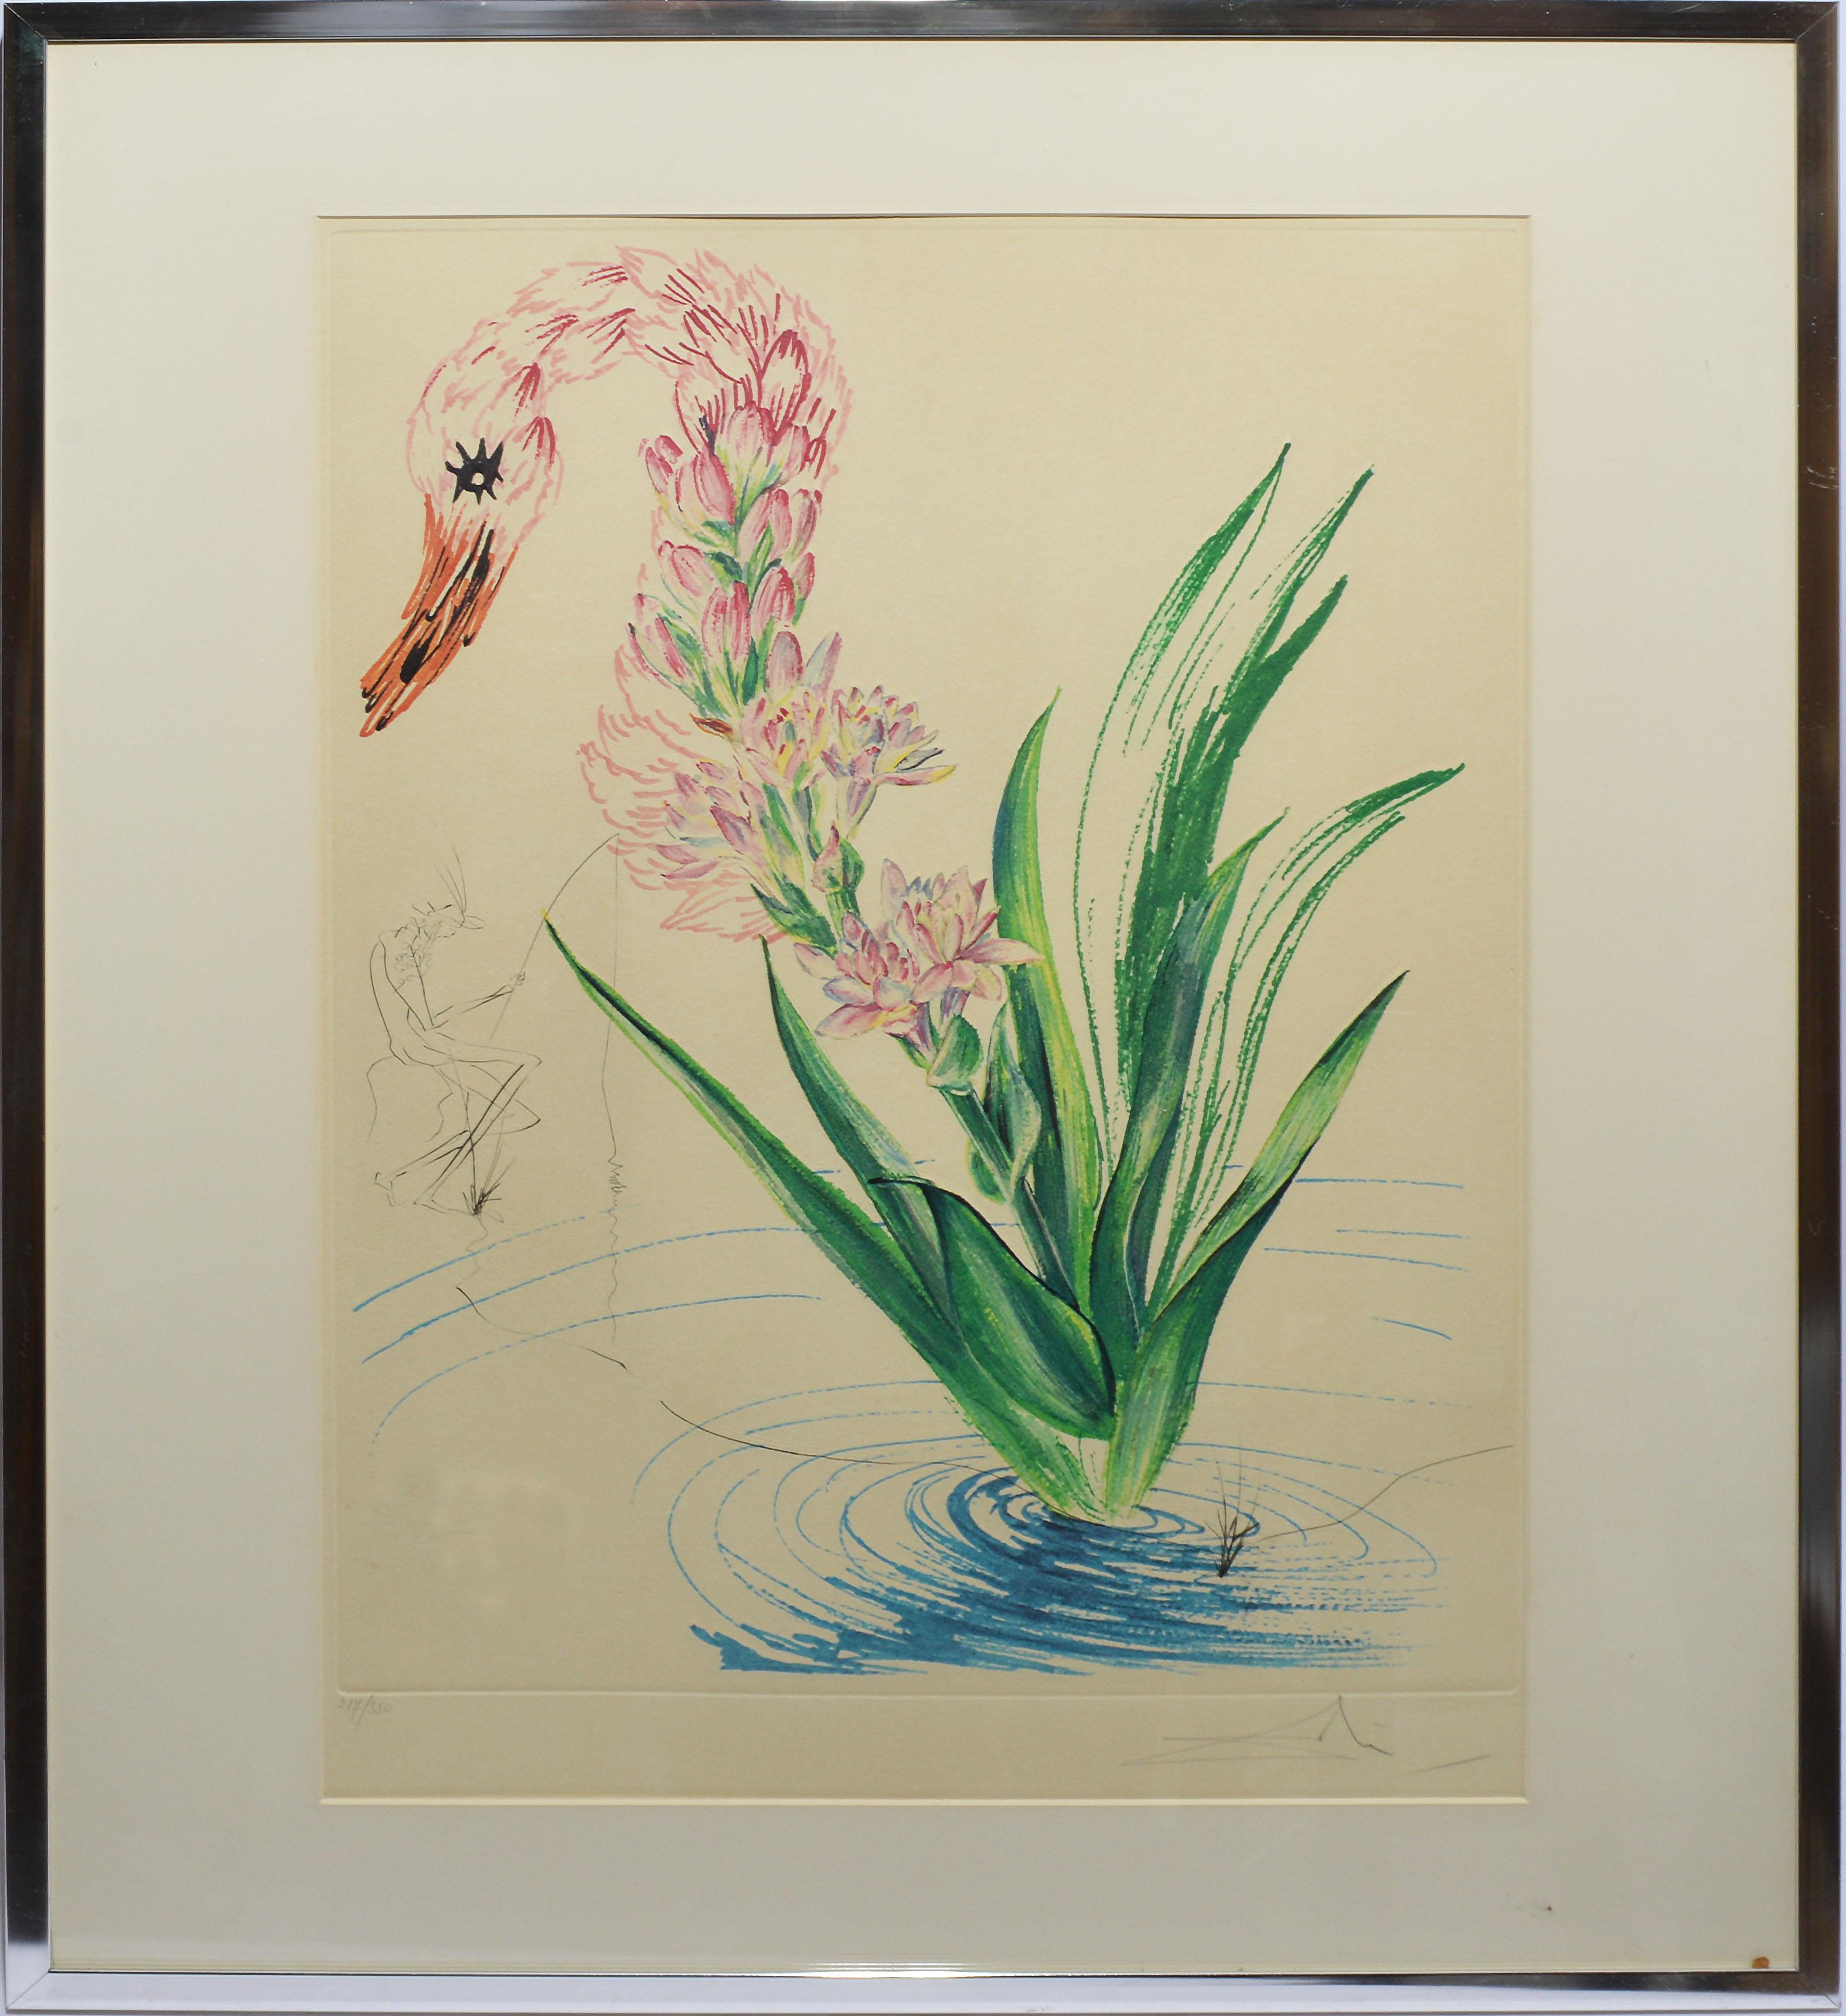 Salvador Dalí Animal Print - Original etching and lithograph, "Water Hibiscus Swan, " hand signed and numbered